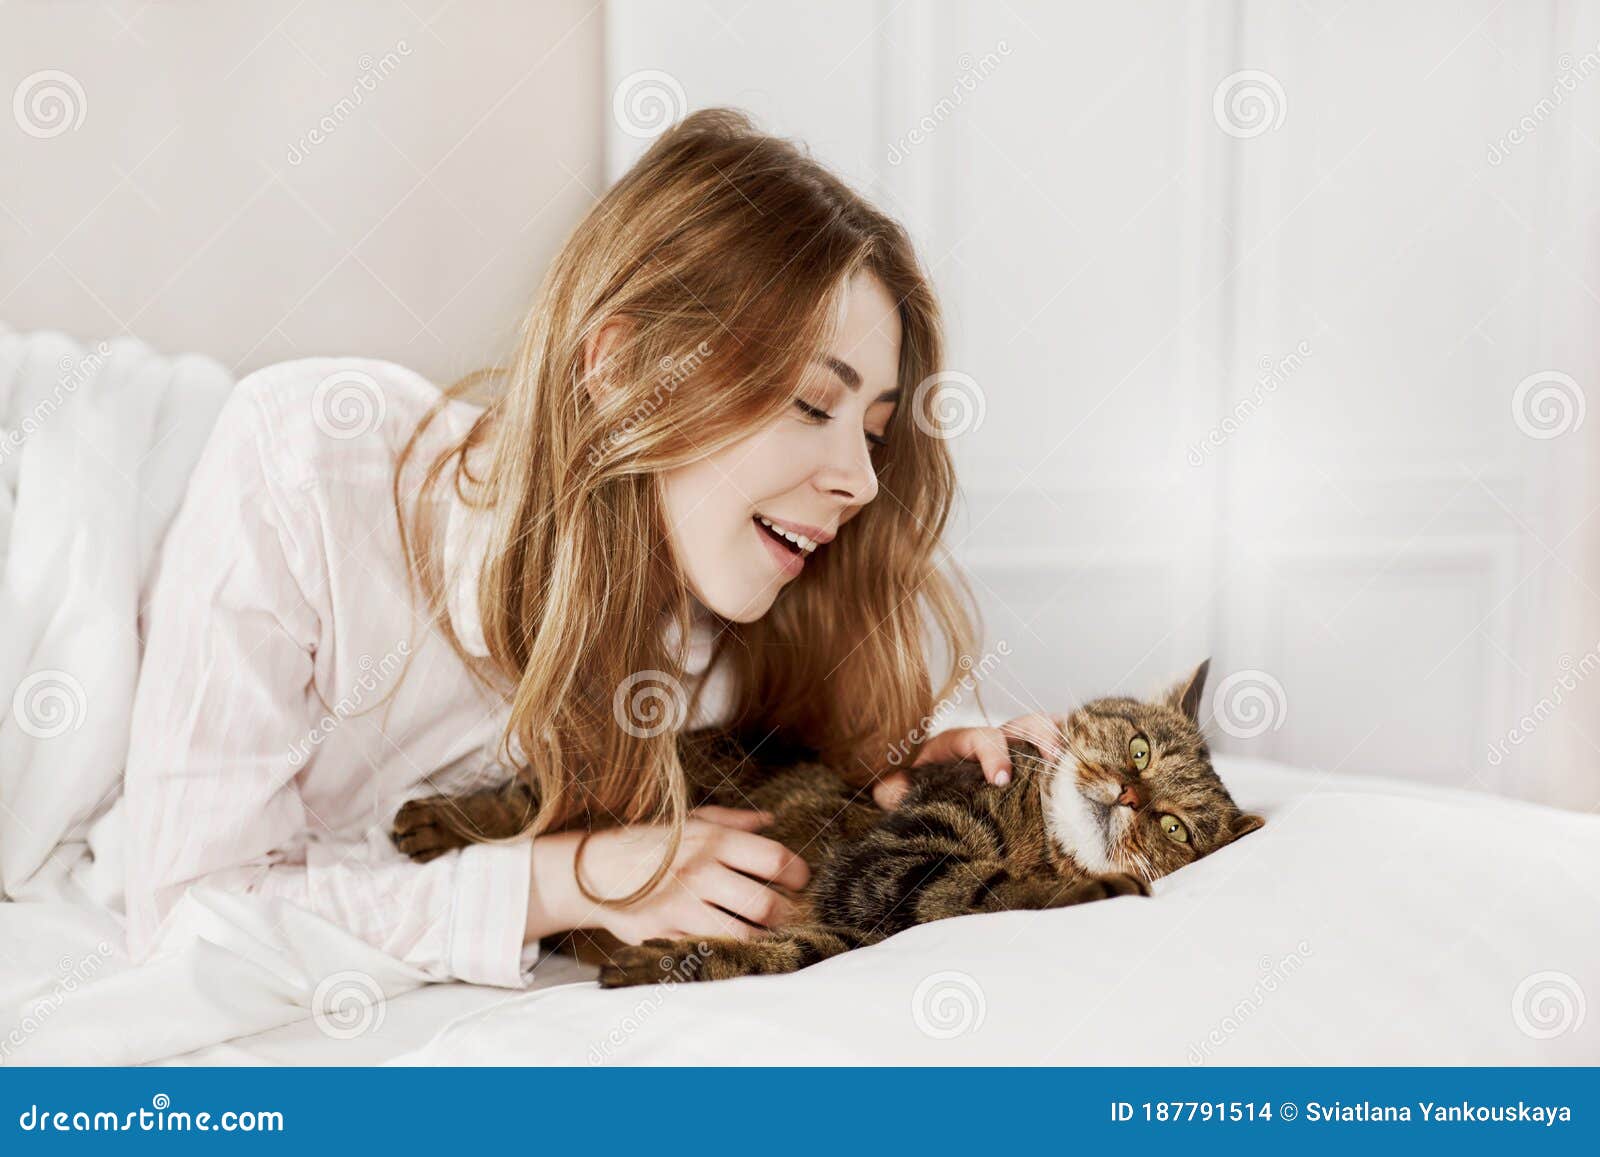 A Beautiful Girl Plays with Her Graceful Fluffy Cat on the Bed at Home ...